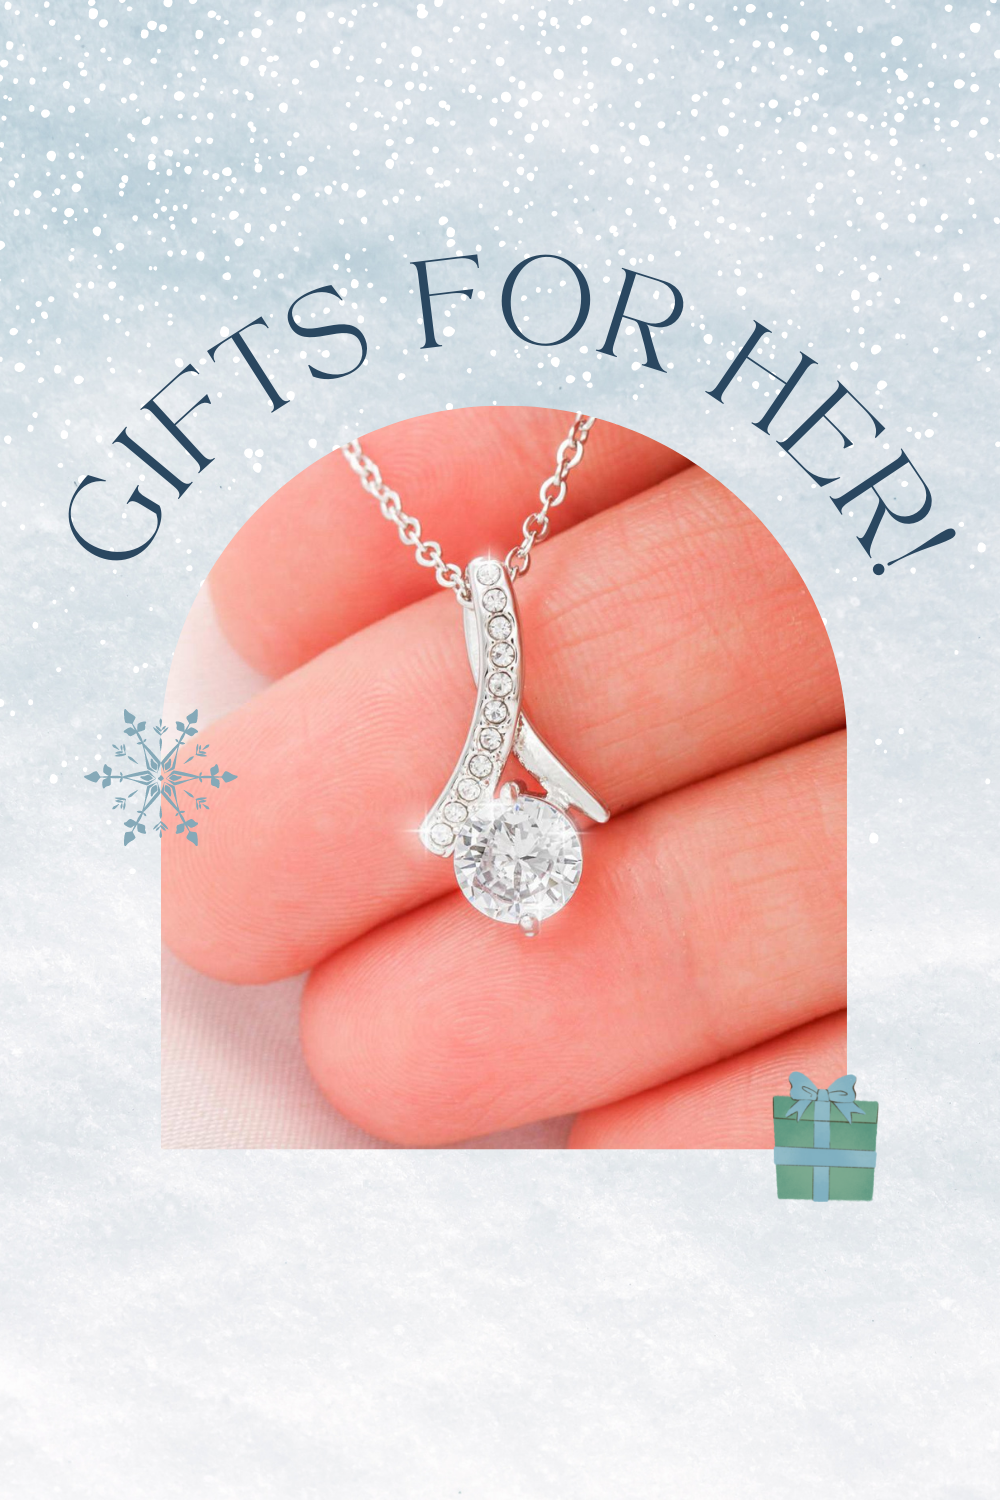 Ultimate Jewelry gift guide for Her 2022